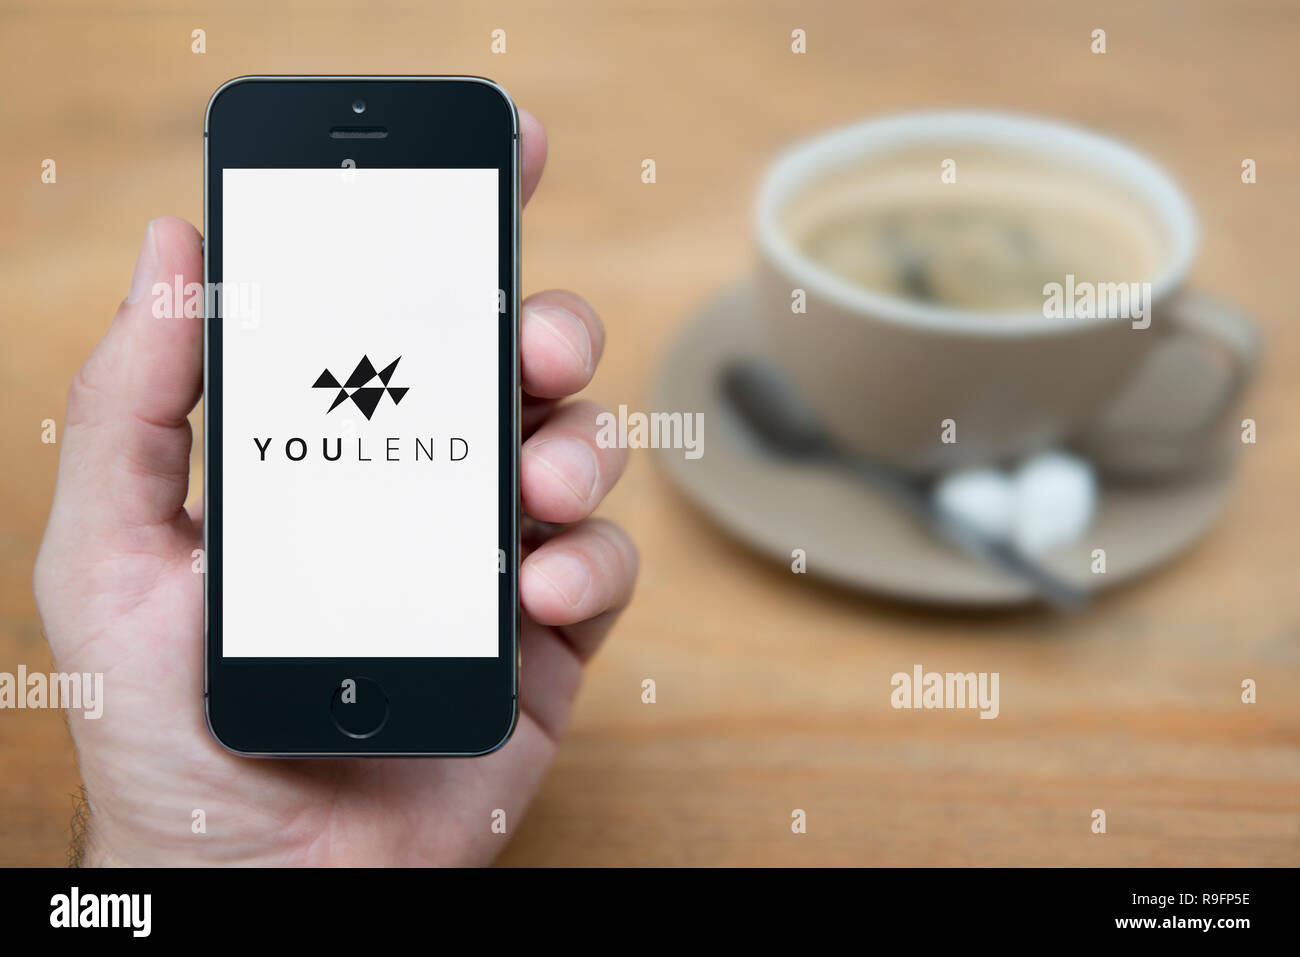 A man looks at his iPhone which displays the YouLend logo (Editorial use only). Stock Photo